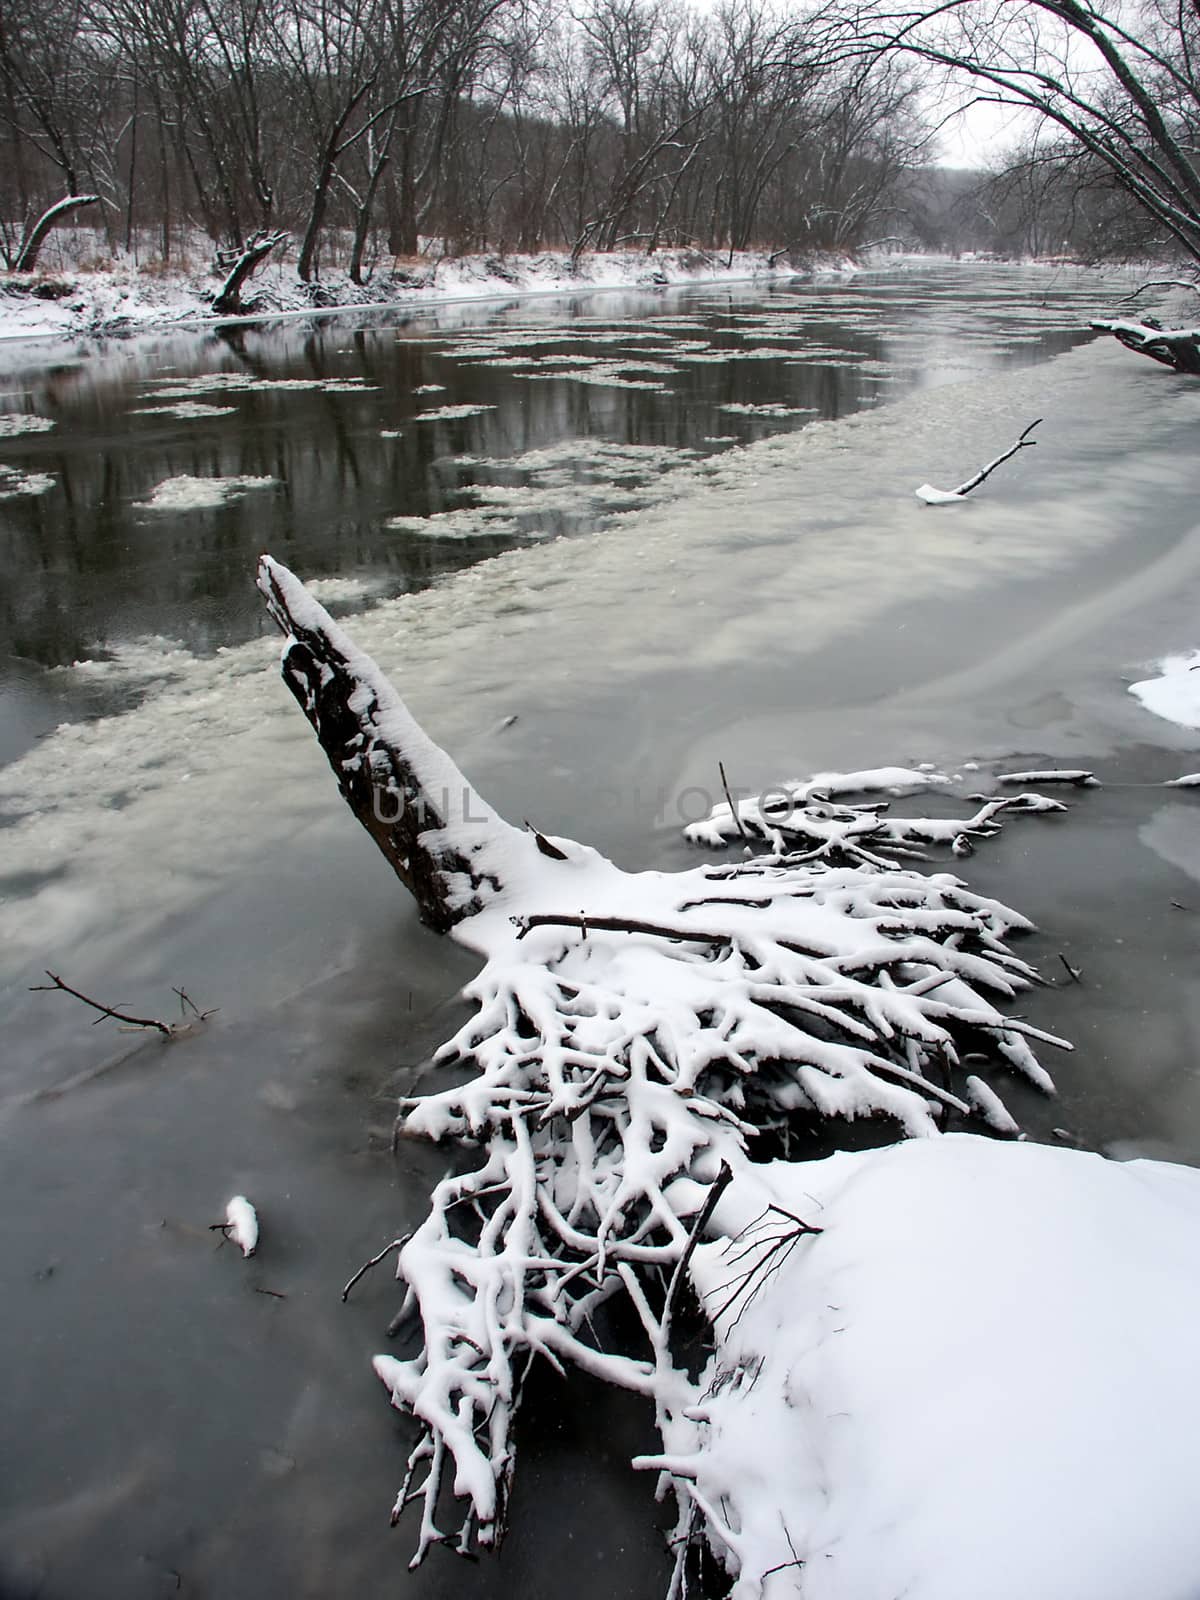 Ice floats down the Kishwaukee River in northern Illinois.